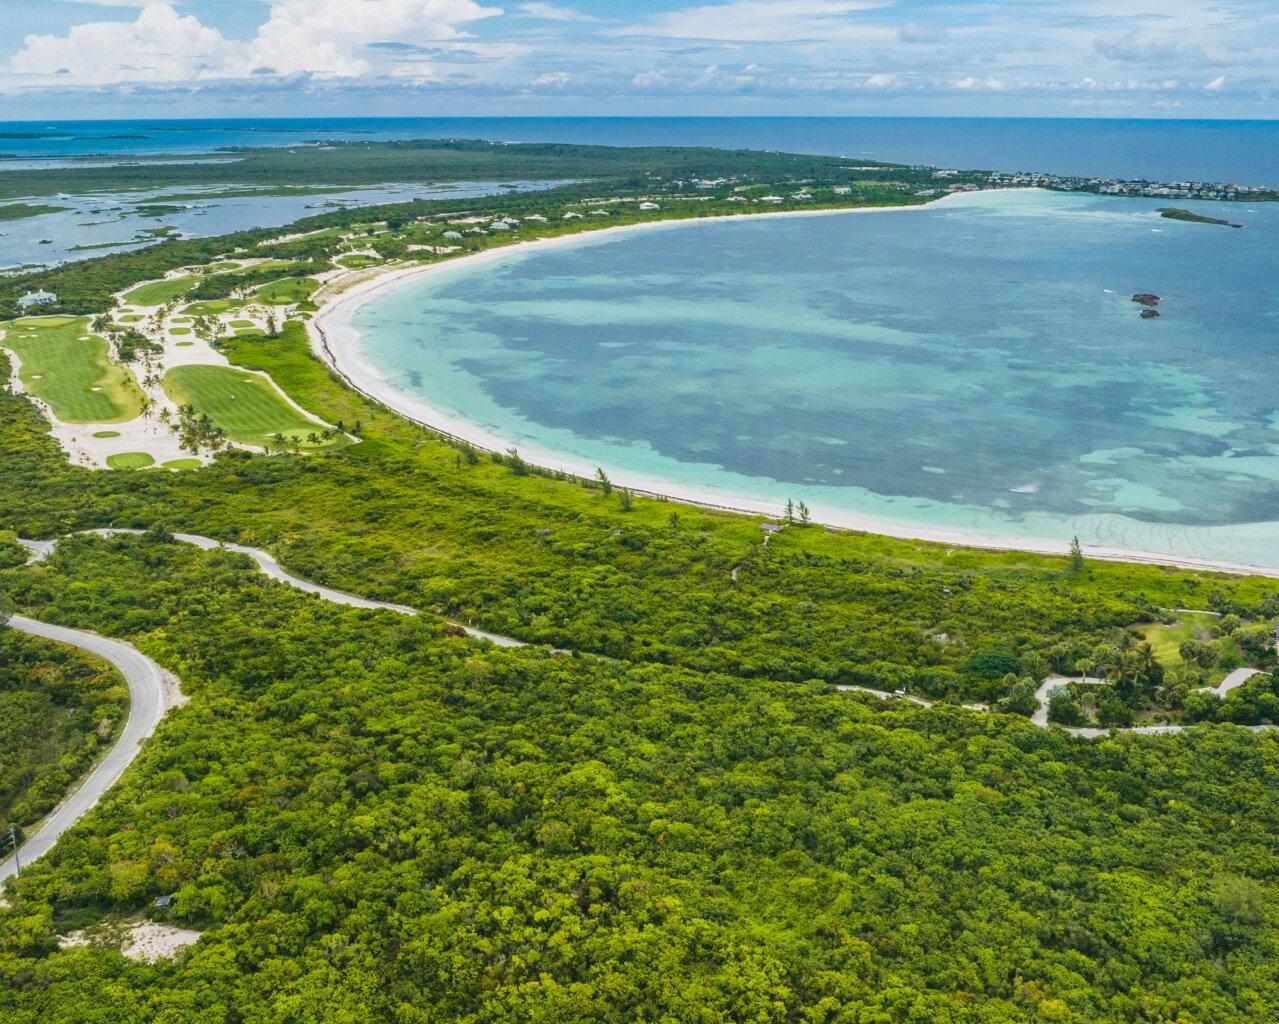 LOT 55 THE ABACO CLUB